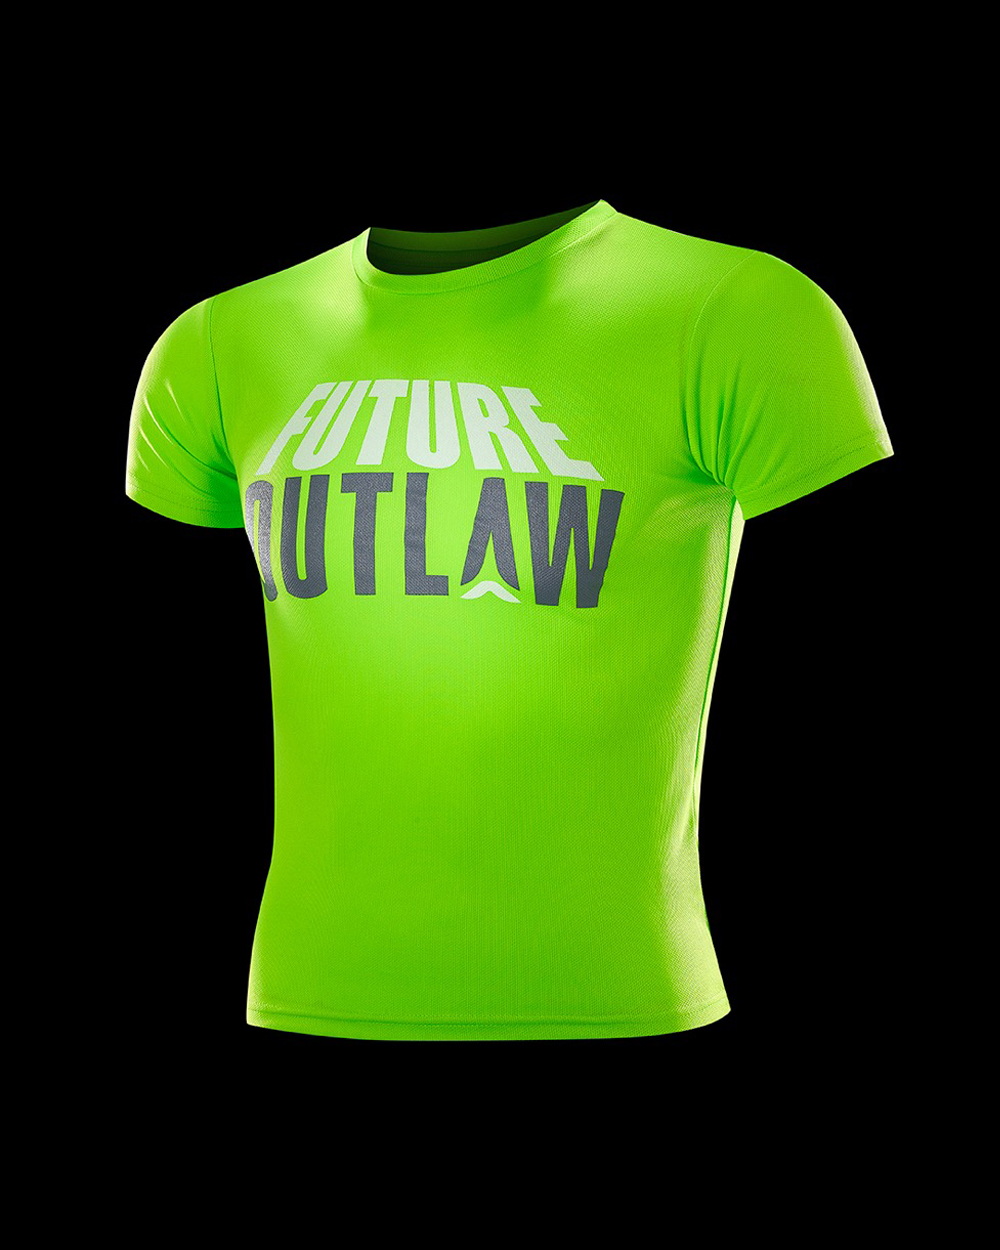 Future Outlaw Kids Electric Green T-shirt